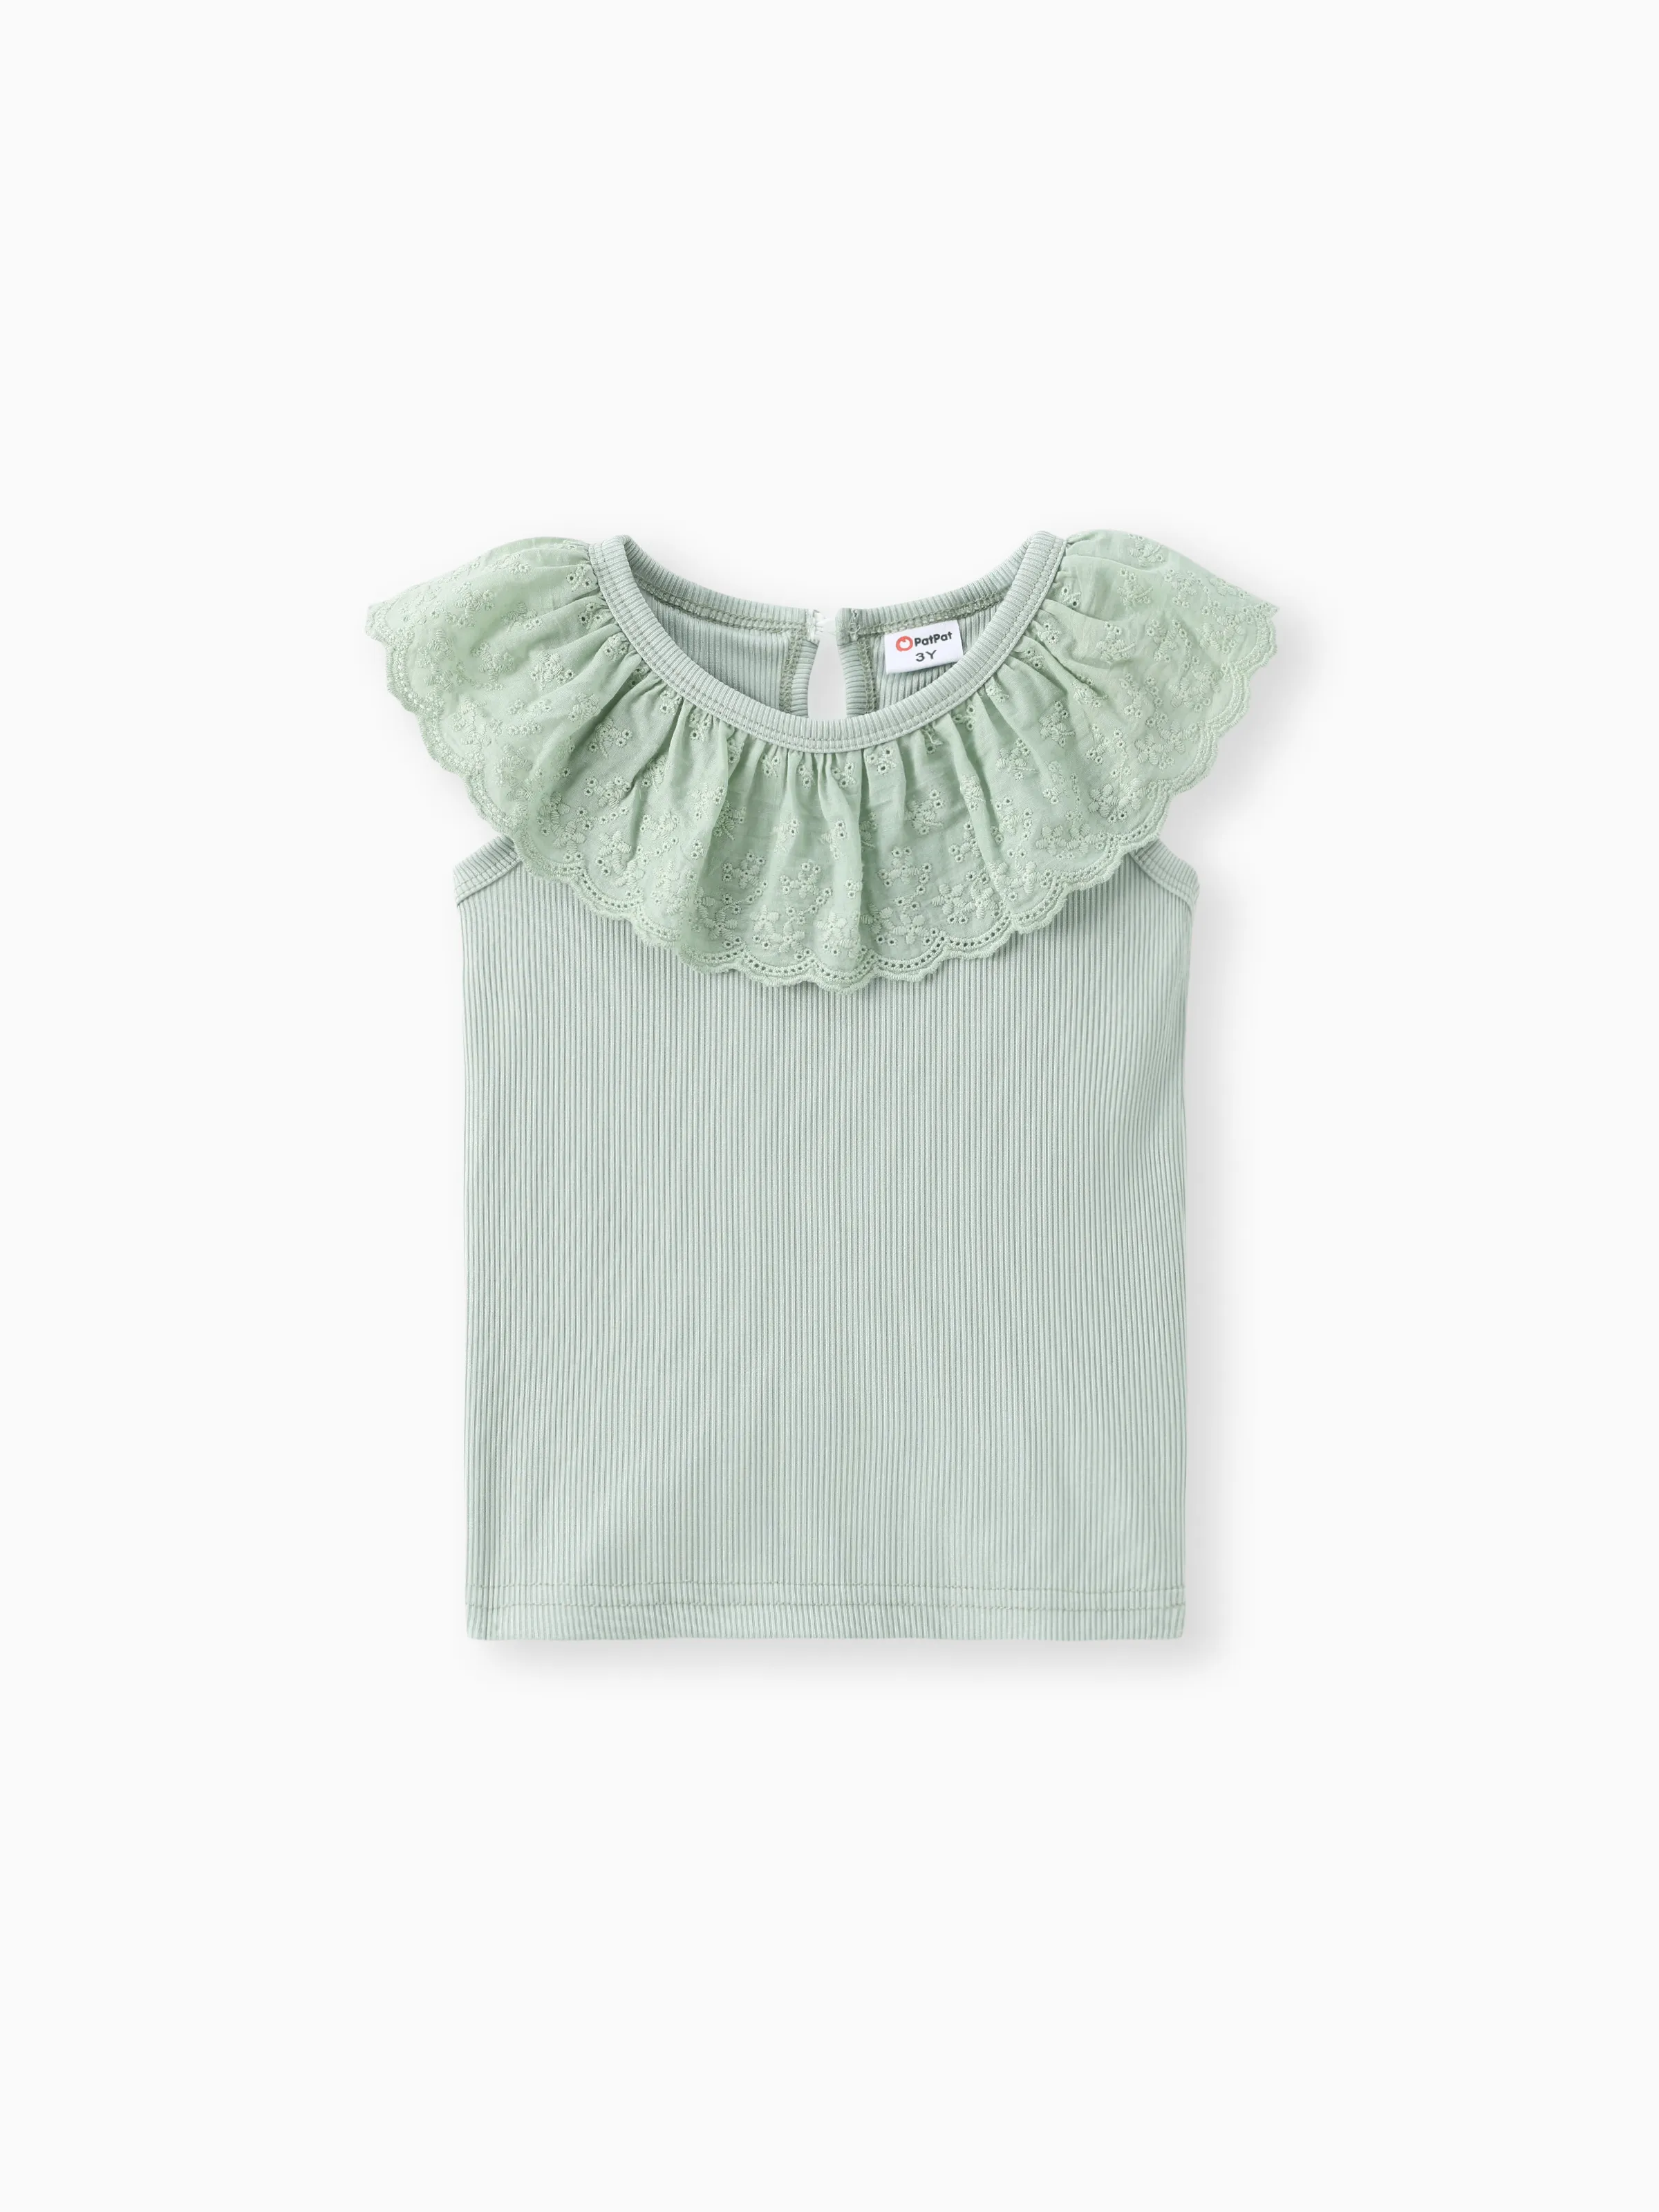 

Sweet Sleeveless Ruffle Edge Tee for Toddler Girls - 95% Polyester and 5% Spandex - 1pc